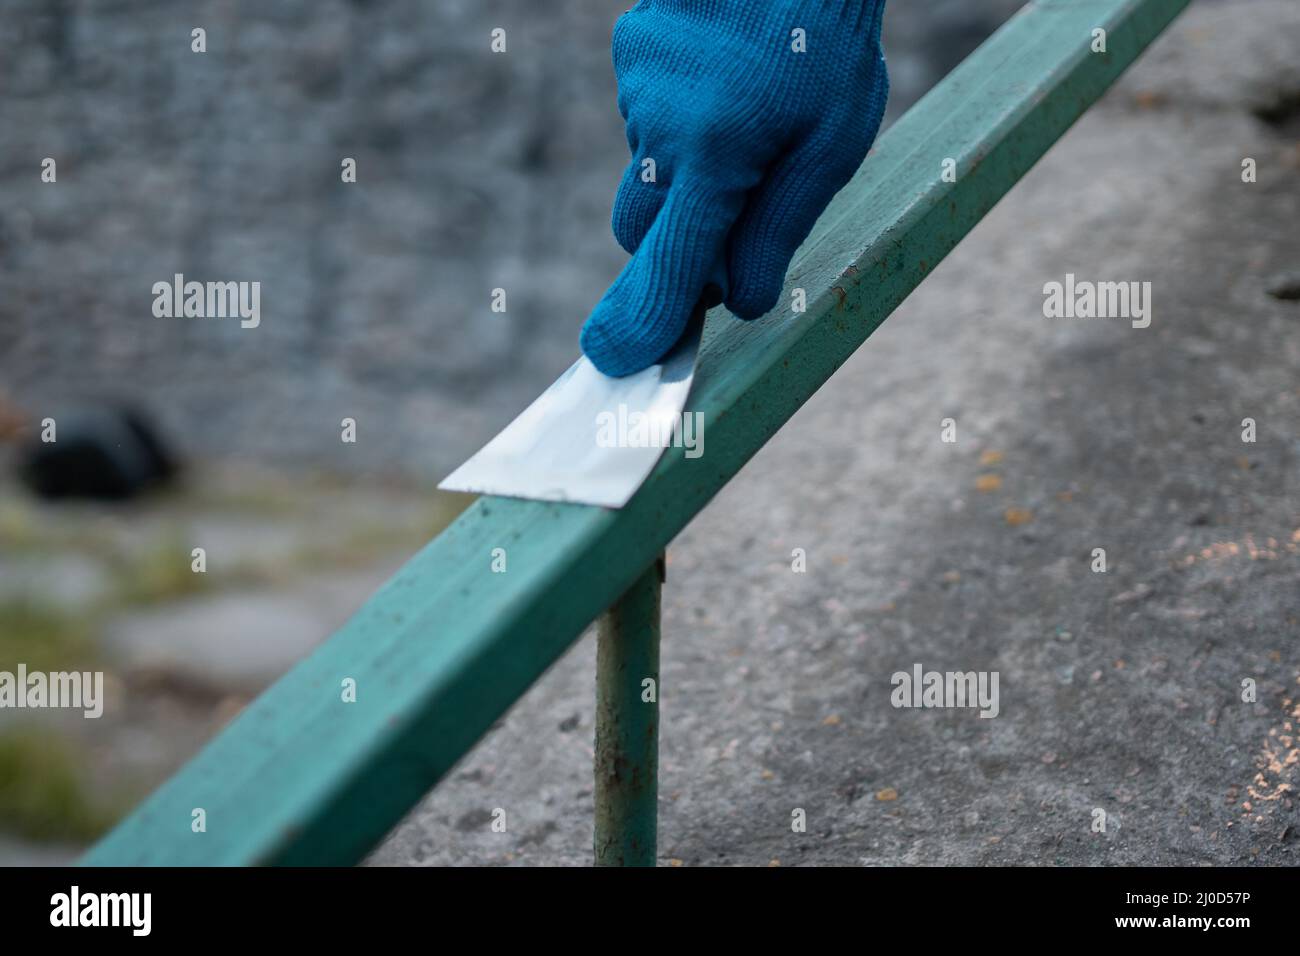 volunteer worker painting and renovate railing or fence in public park Stock Photo